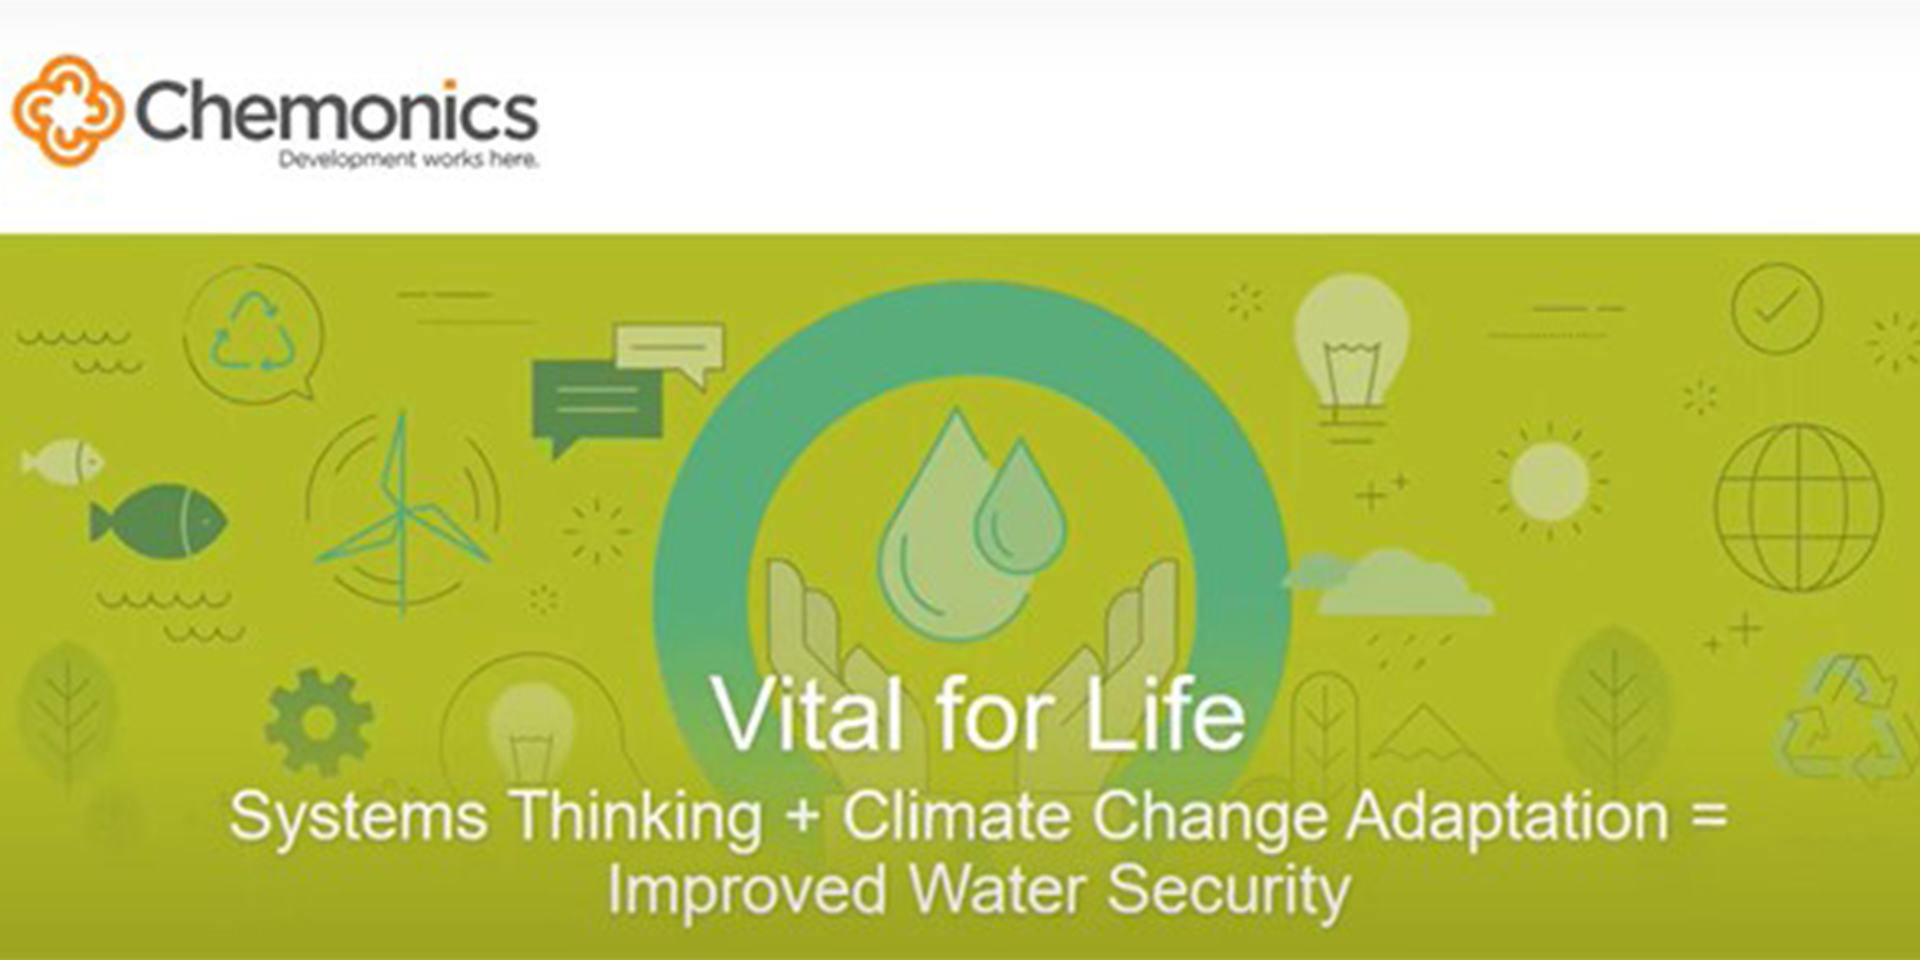 Image of a graphic that says "Vital for Life: Systems Thinking Plus Climate Change Adaptation Equals Improved Water Security." The background includes an image of a pair of hands holding a large drop of water, surrounded by illustrations of fish, wind turbines, lightbulbs, and trees.